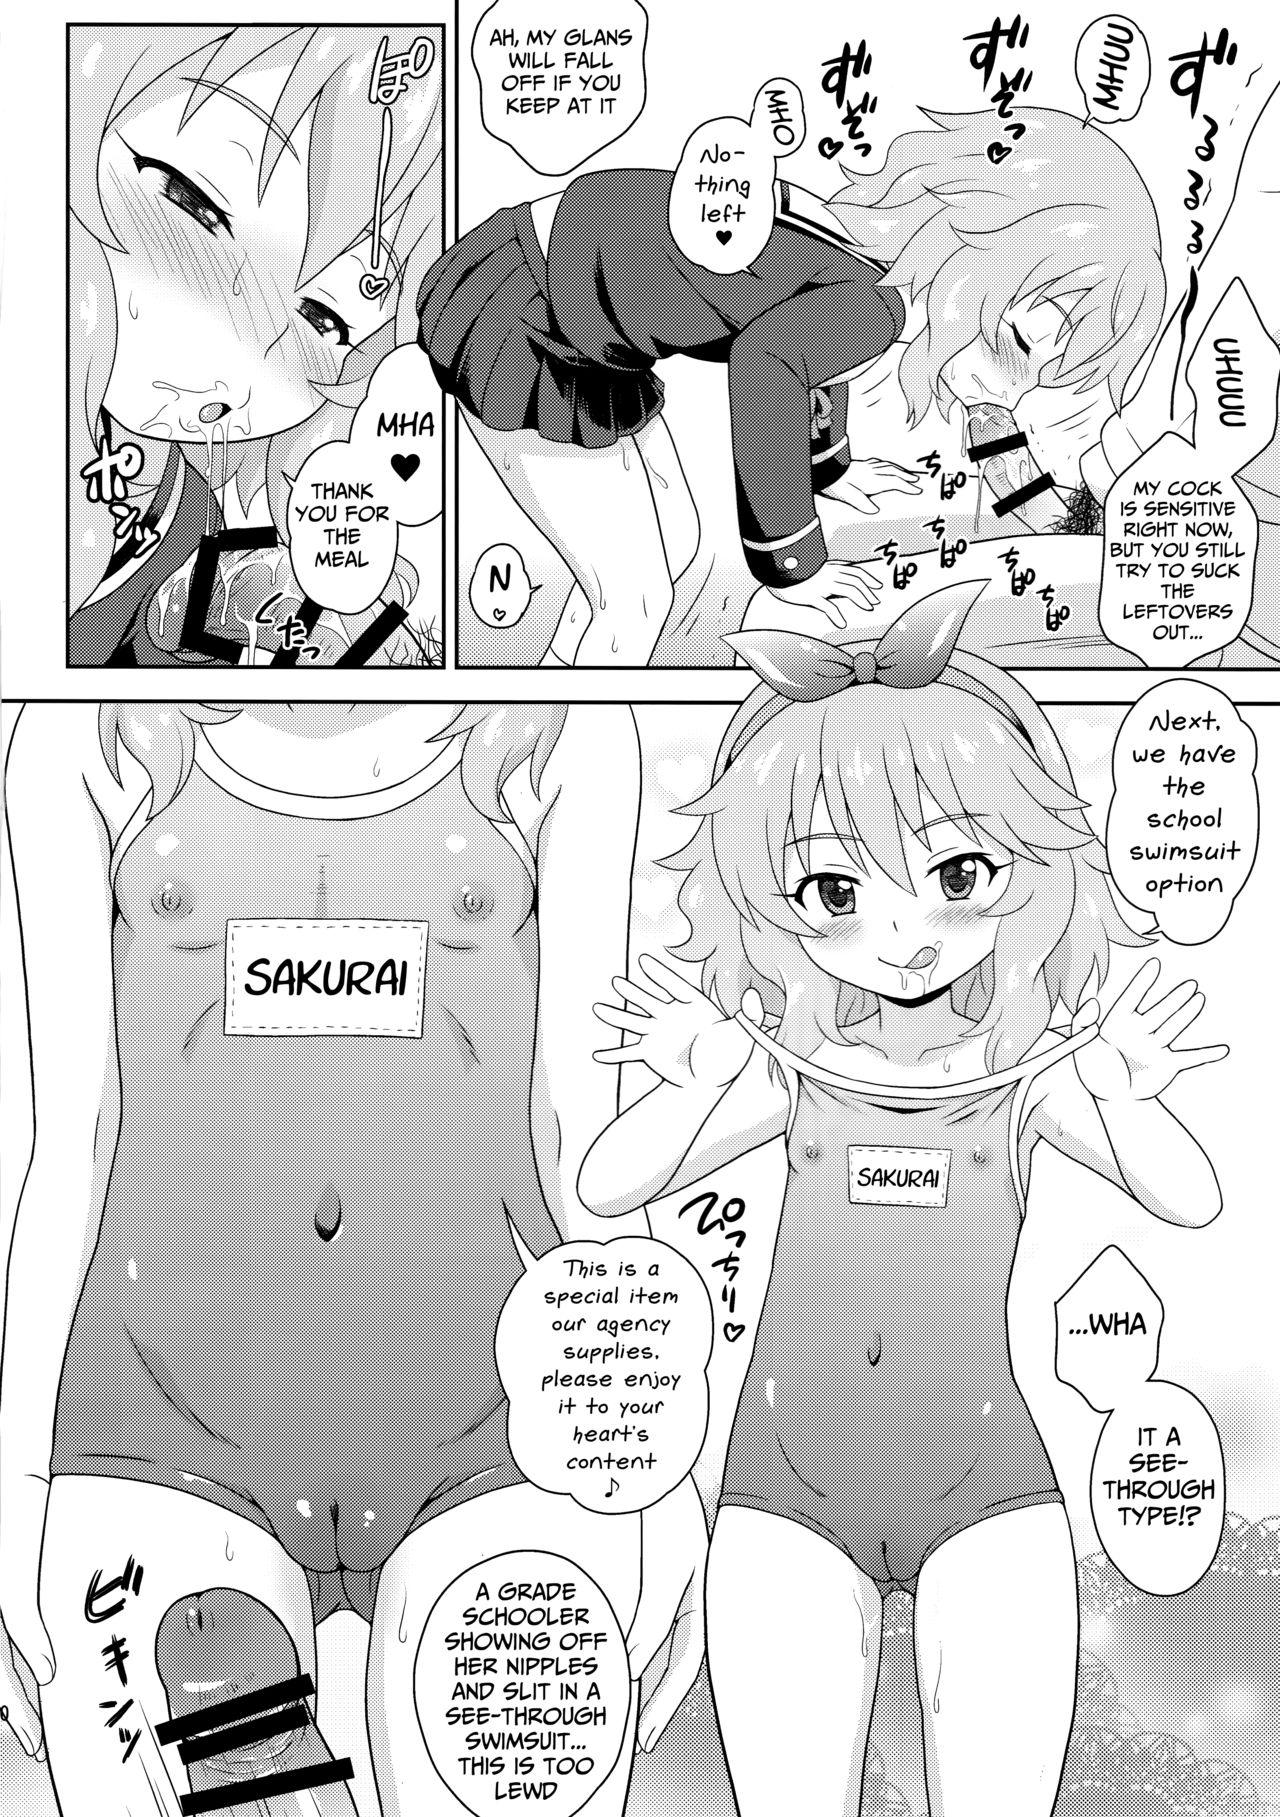 [Taikan Kyohougumi (Azusa Norihee)] Delivery Days (THE iDOLM@STER CINDERELLA GIRLS) [English] [Mongolfier] [2017-01-16] page 10 full